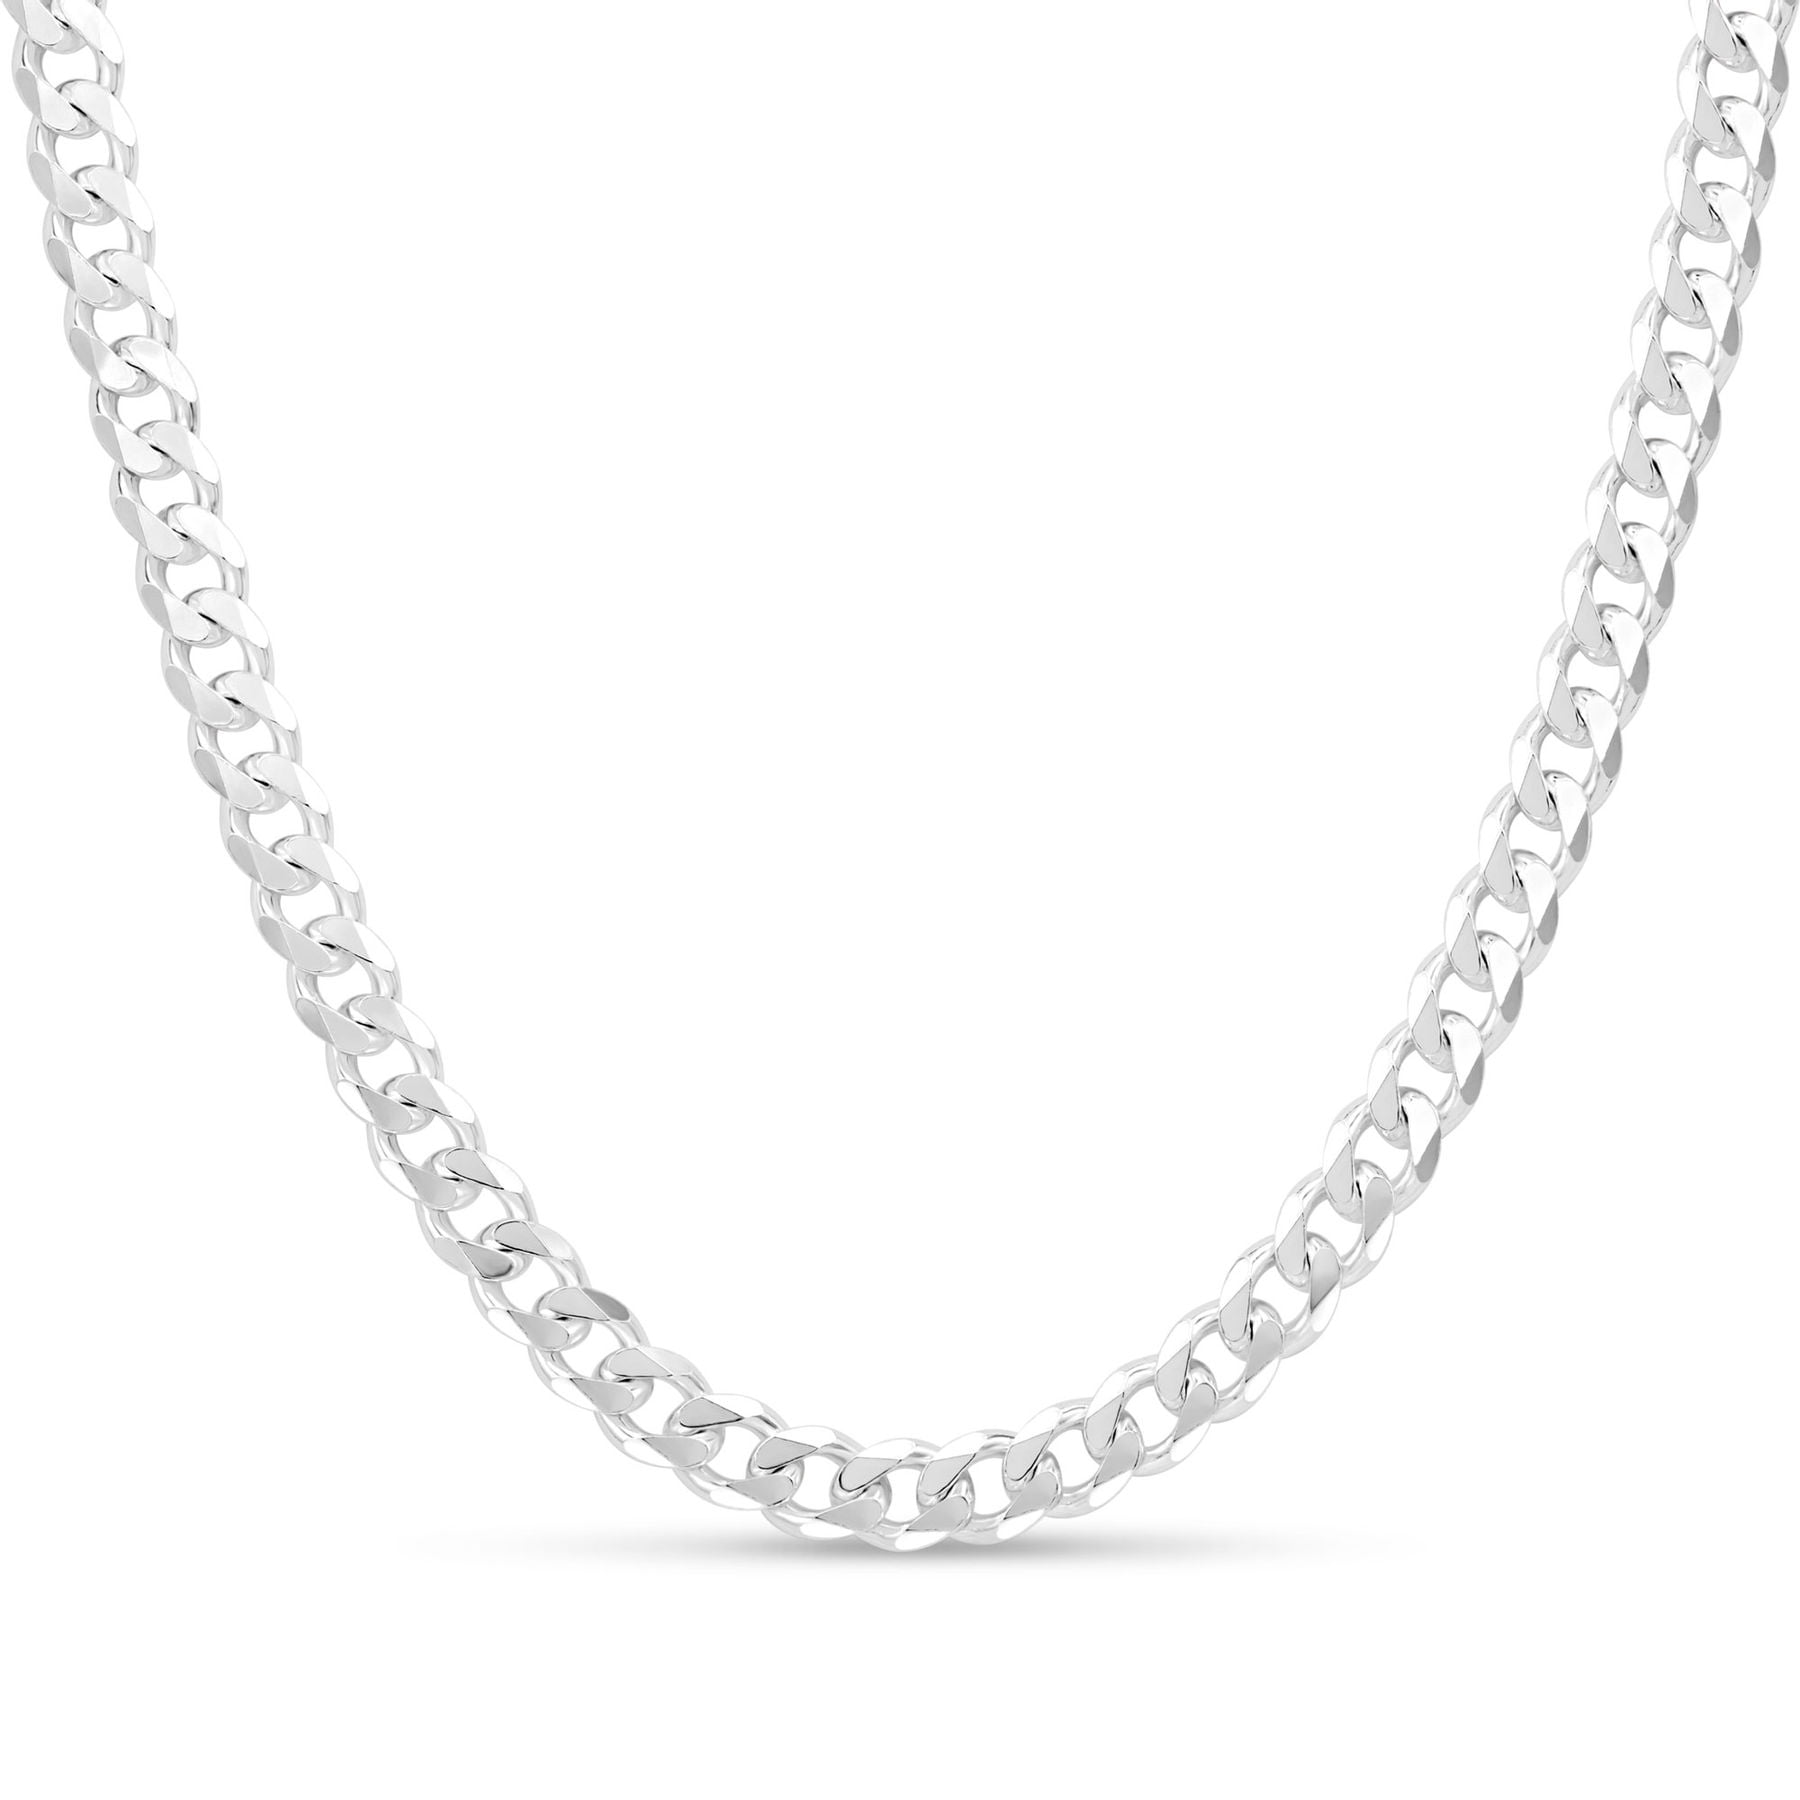 Necklace Chain Real 925 Sterling Silver S/F Solid Men's Heavy Curb Link 24" 